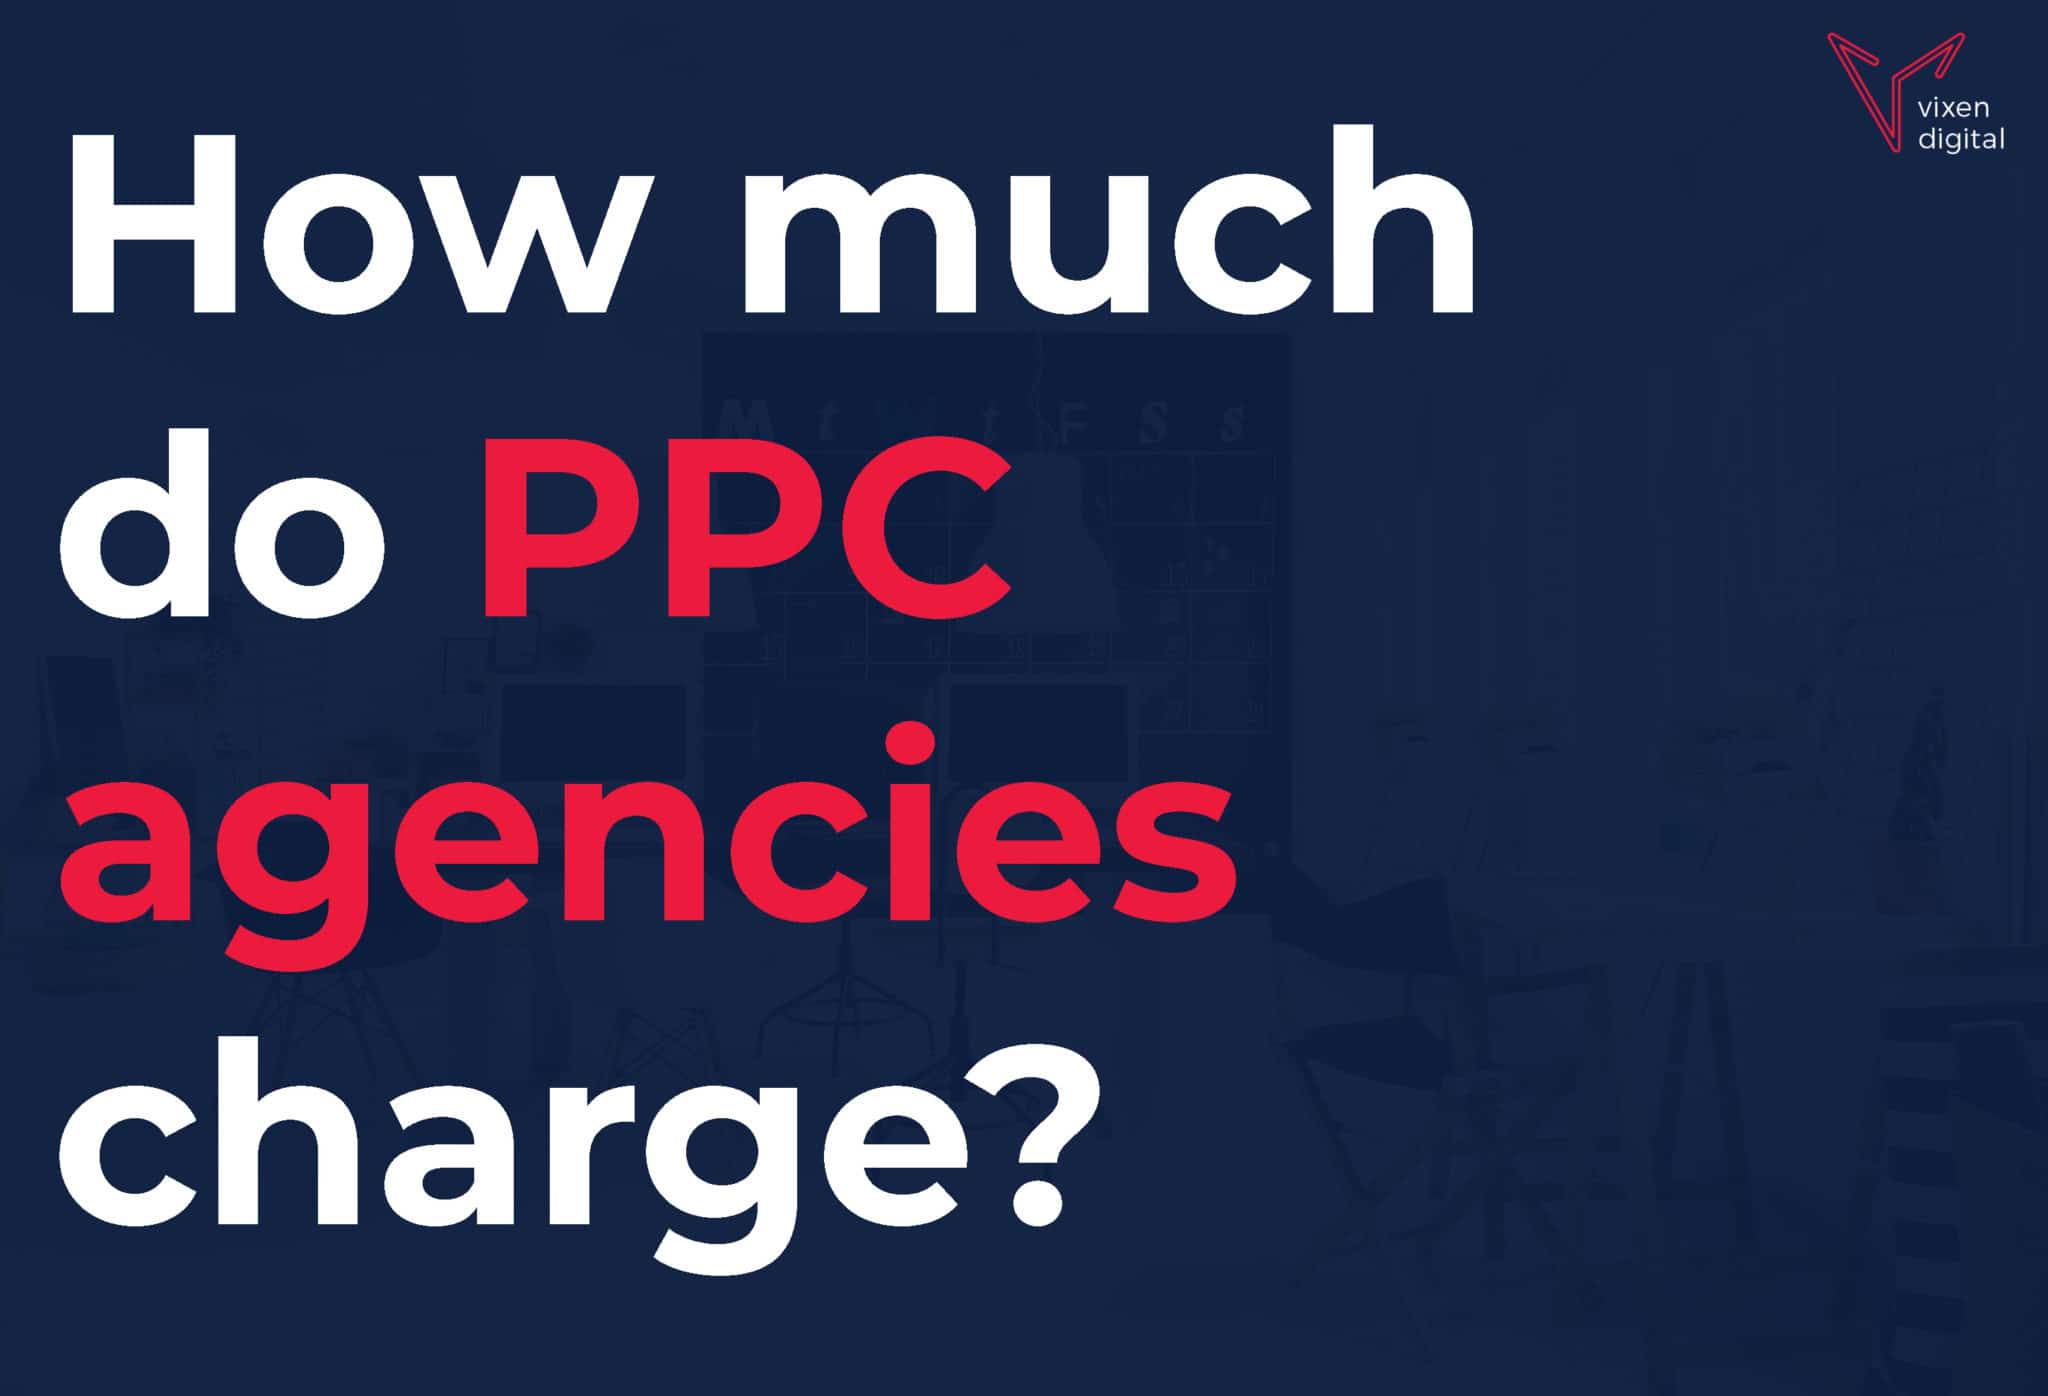 how much do ppc agencies charge? featured image and text